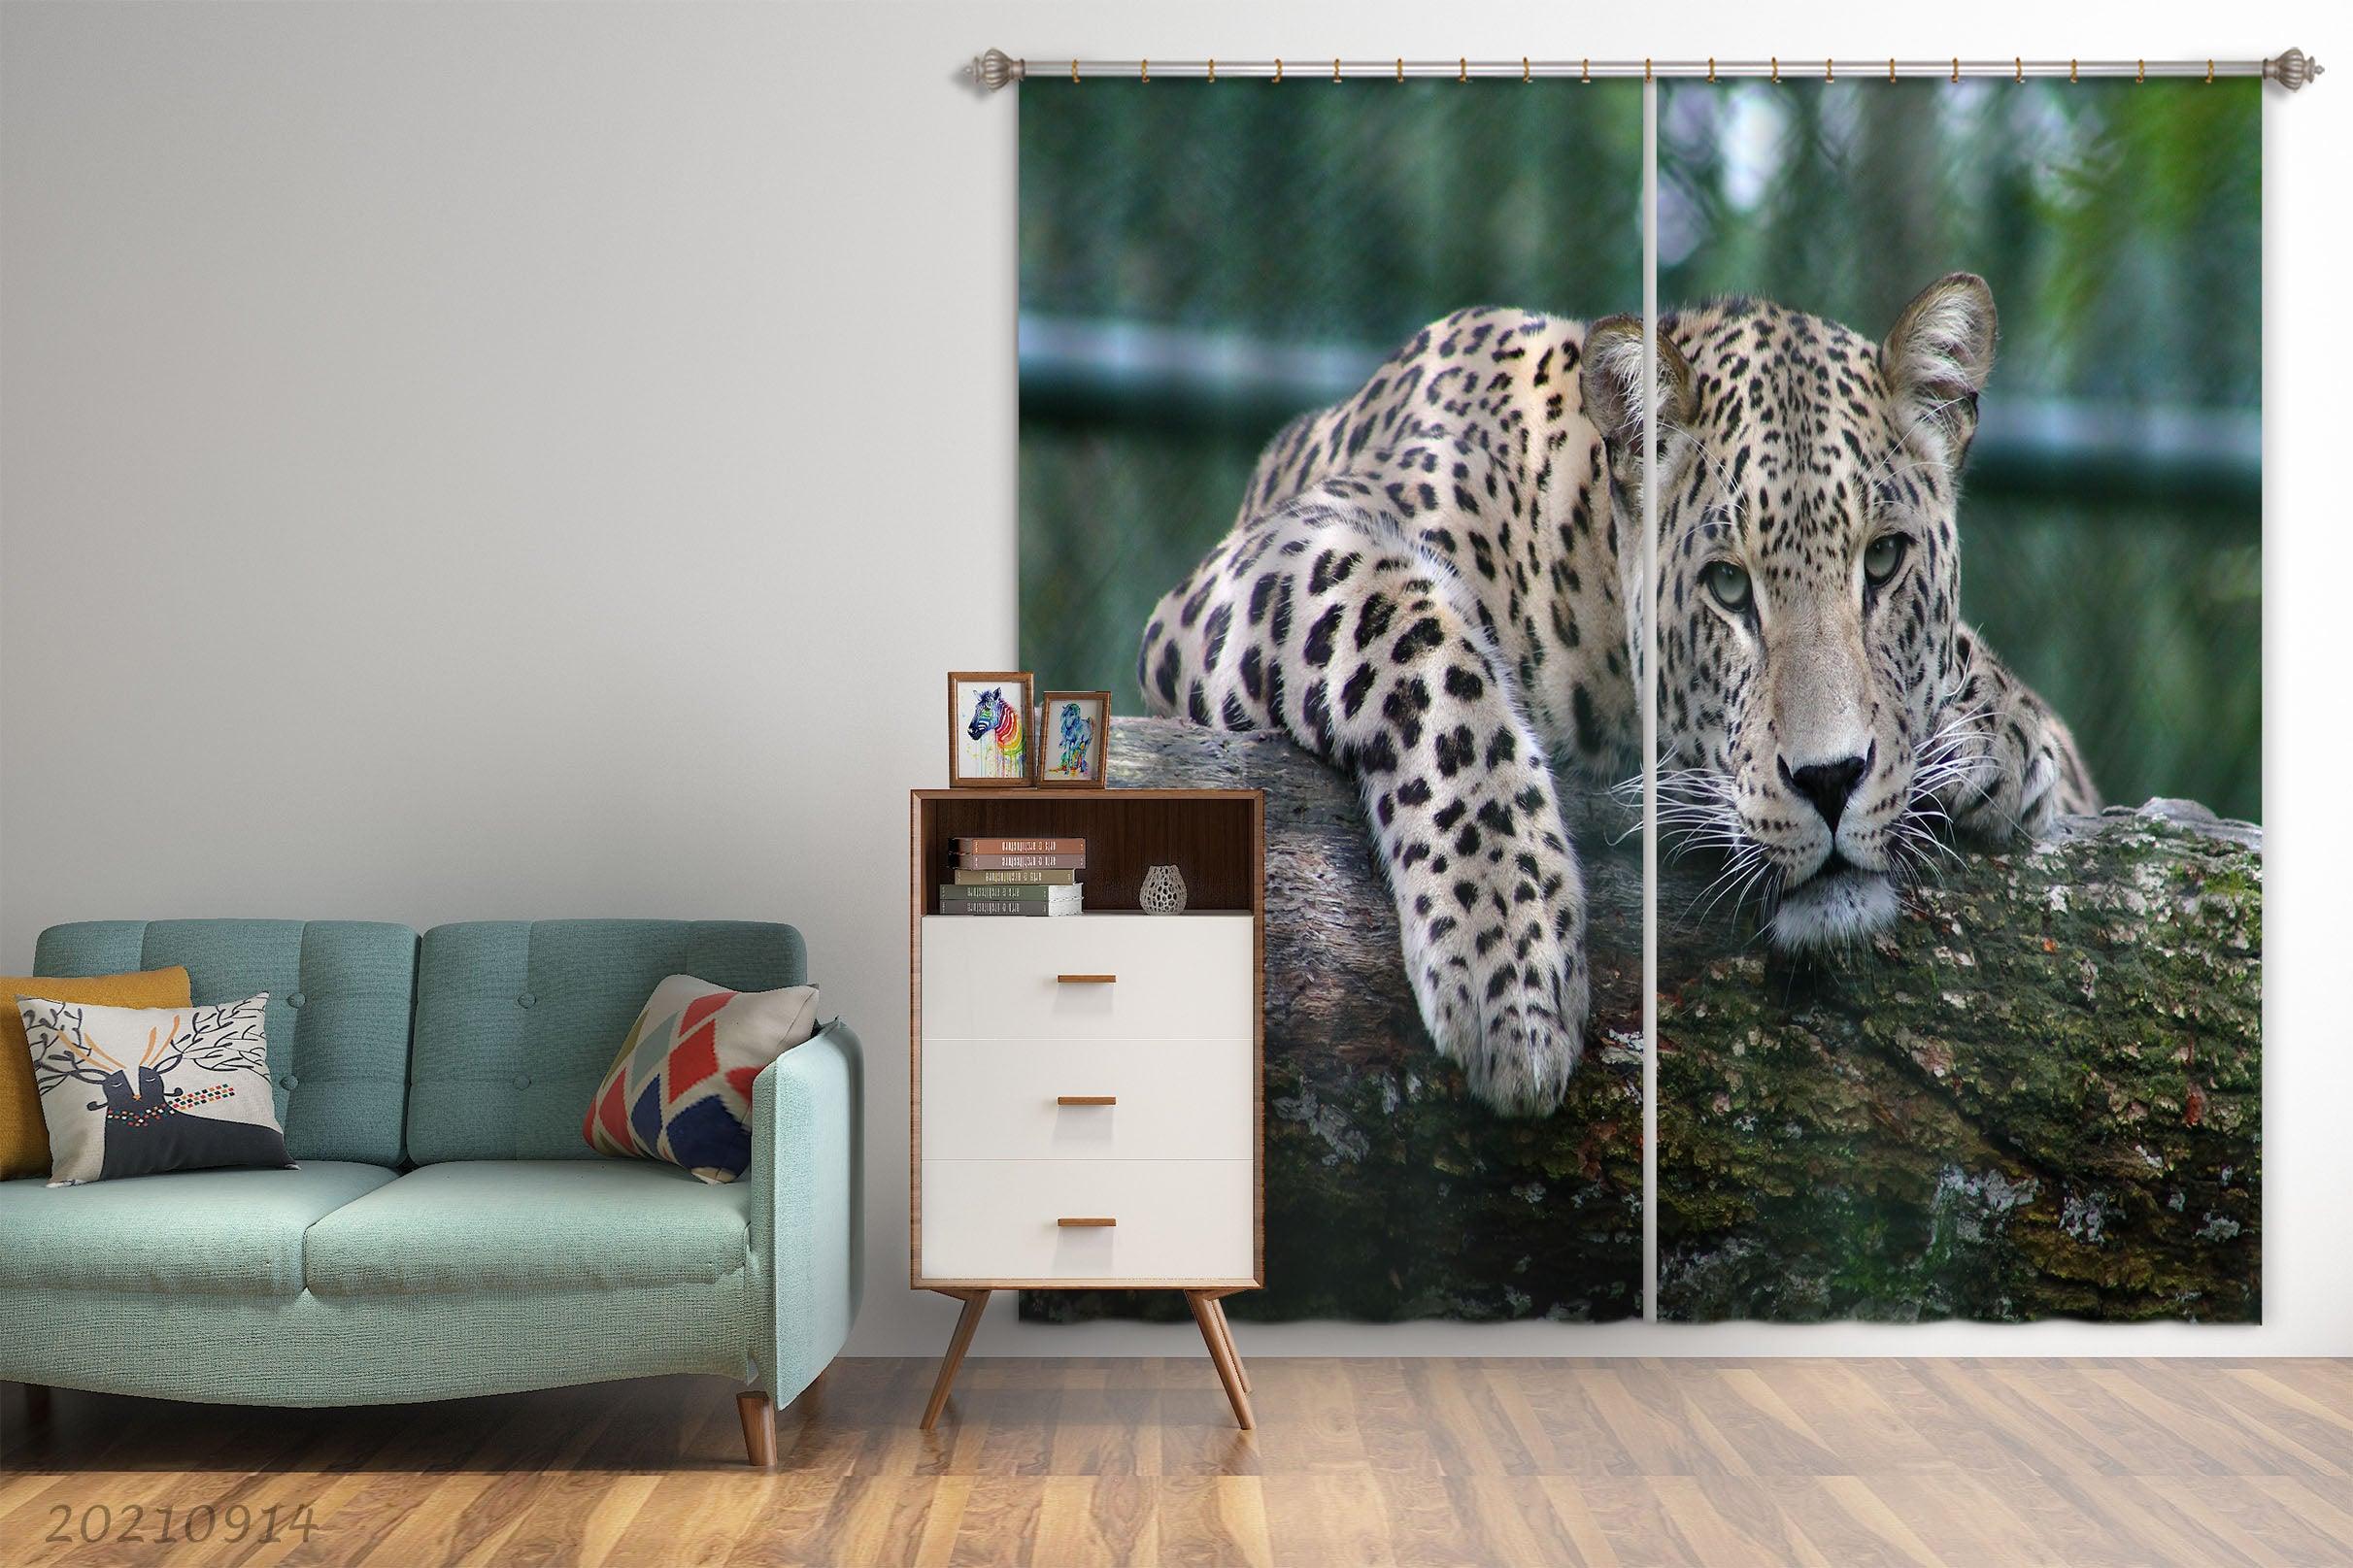 3D Zoo Animal Leopard Trunk Curtains and Drapes LQH 202- Jess Art Decoration